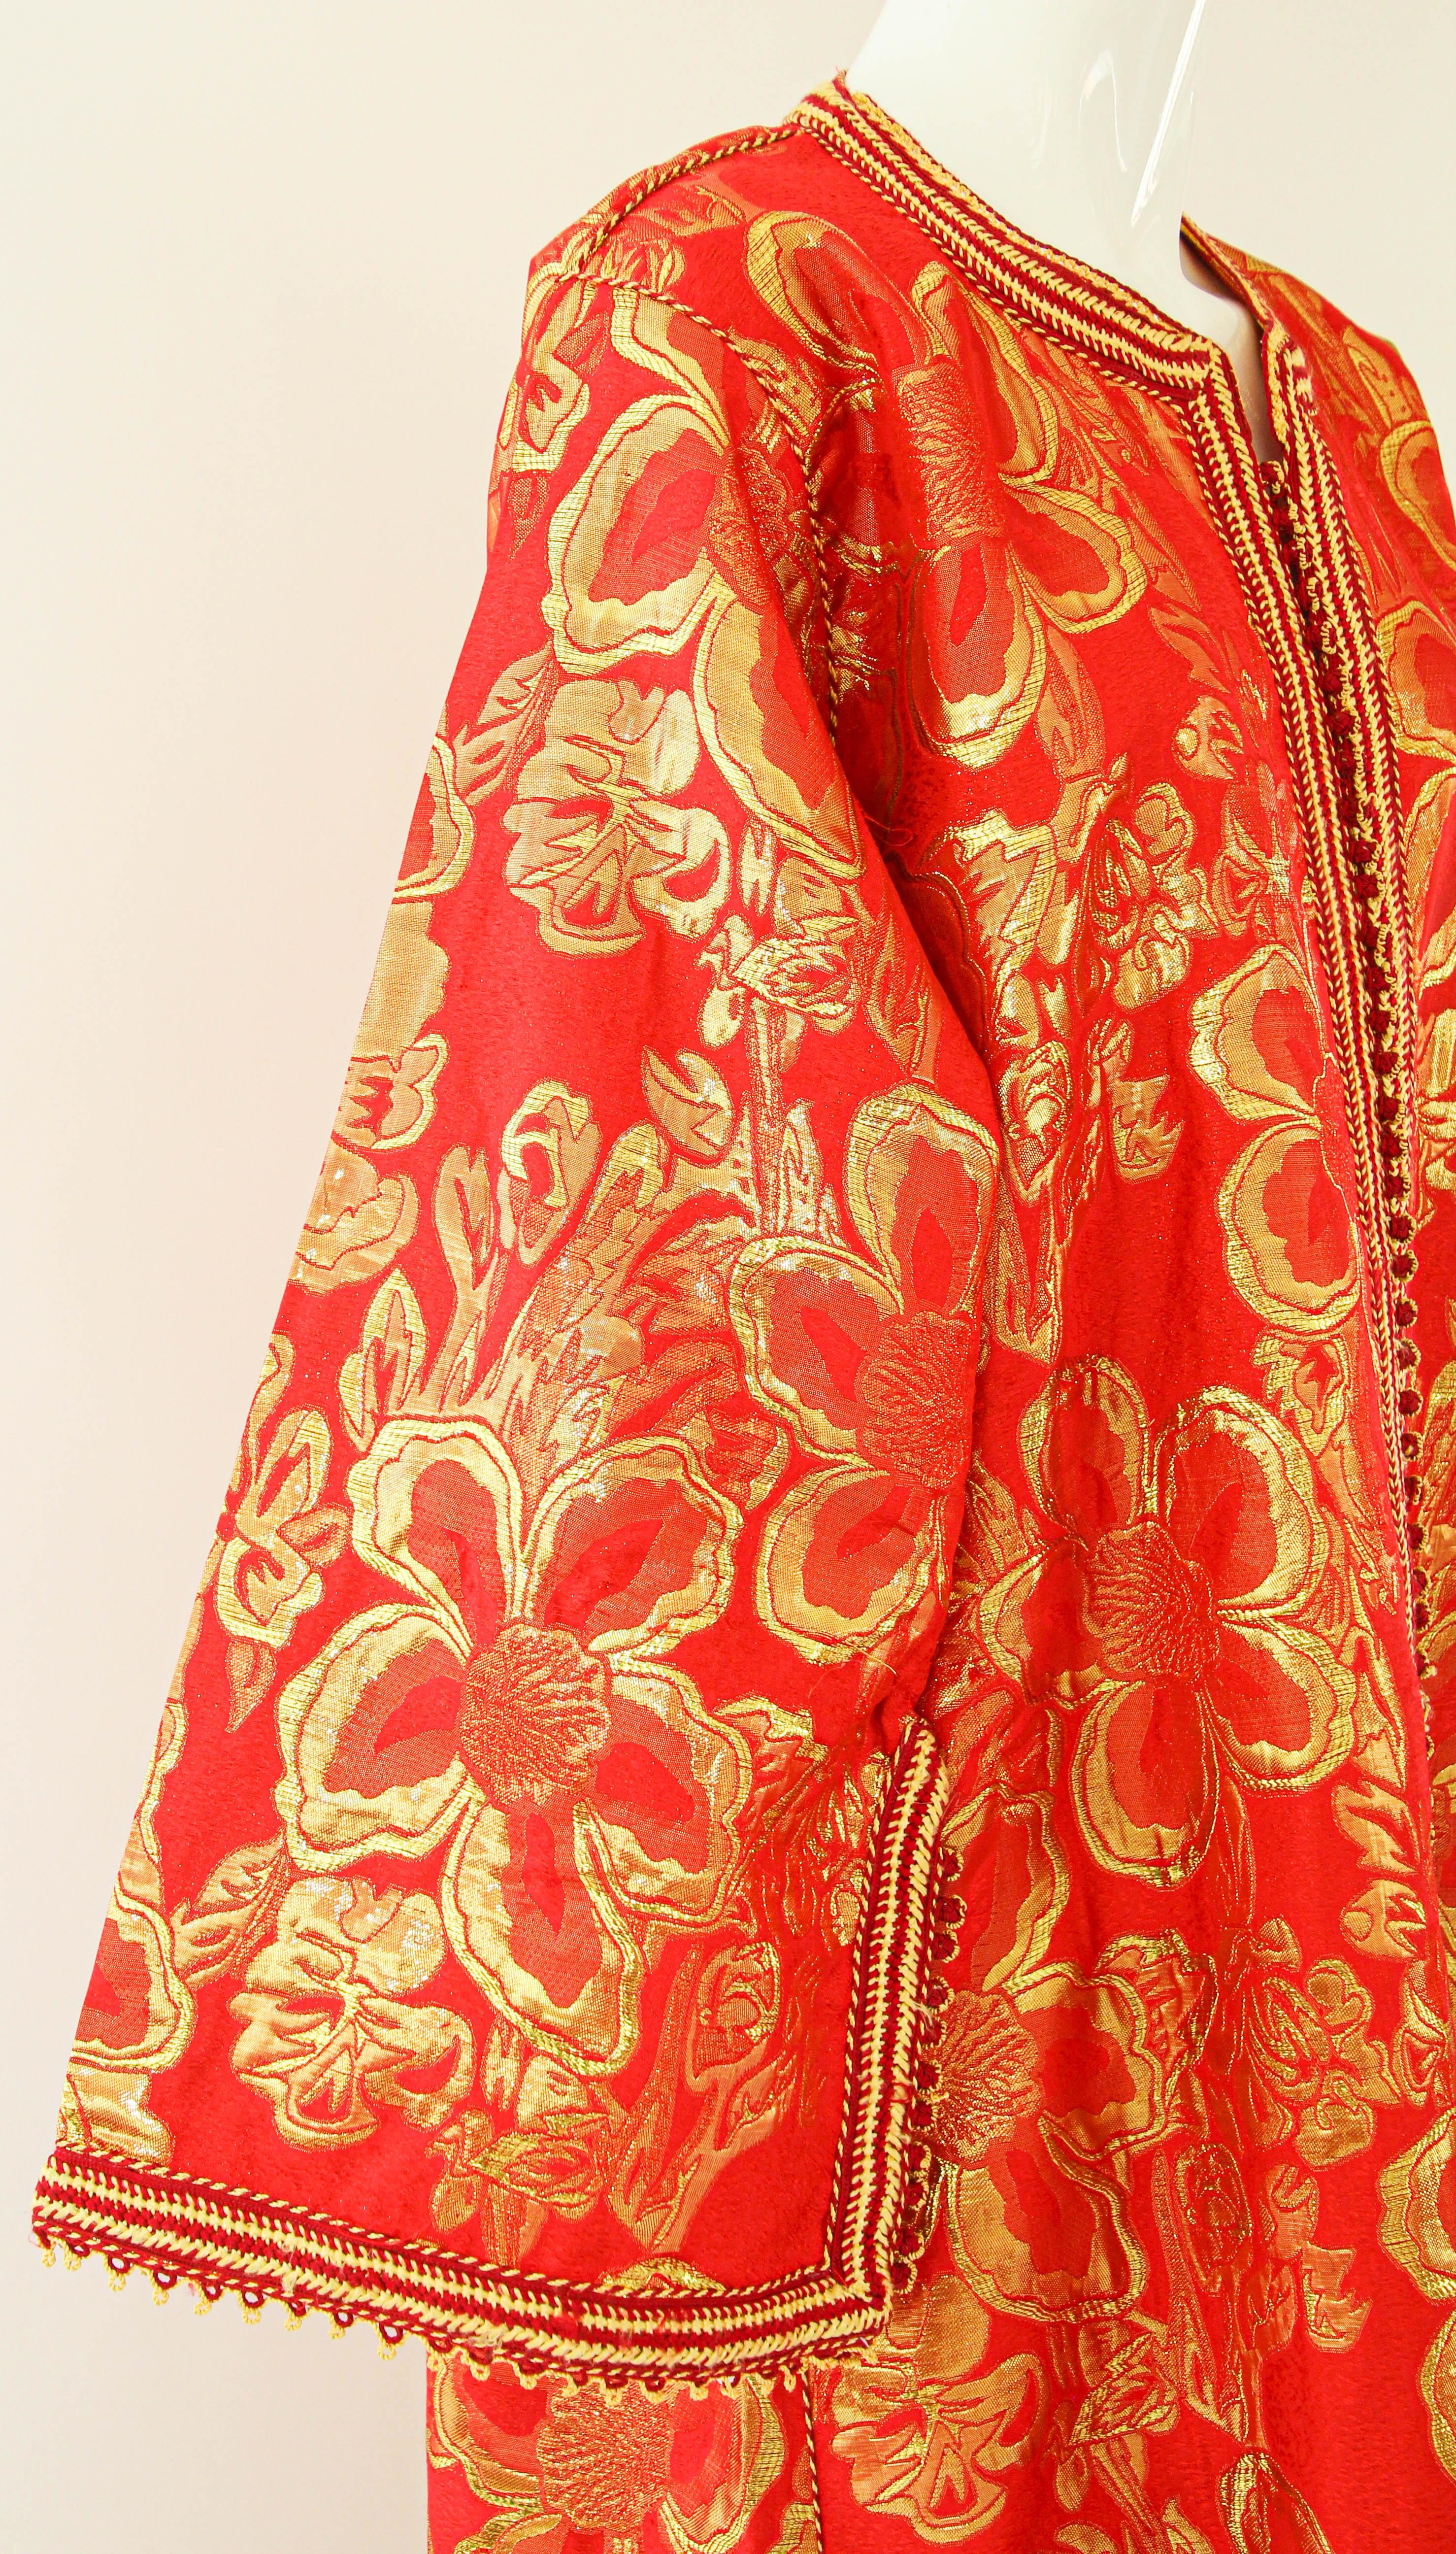 1970s Vintage Moroccan Kaftan Red and Gold Brocade Caftan Maxi Dress For Sale 3